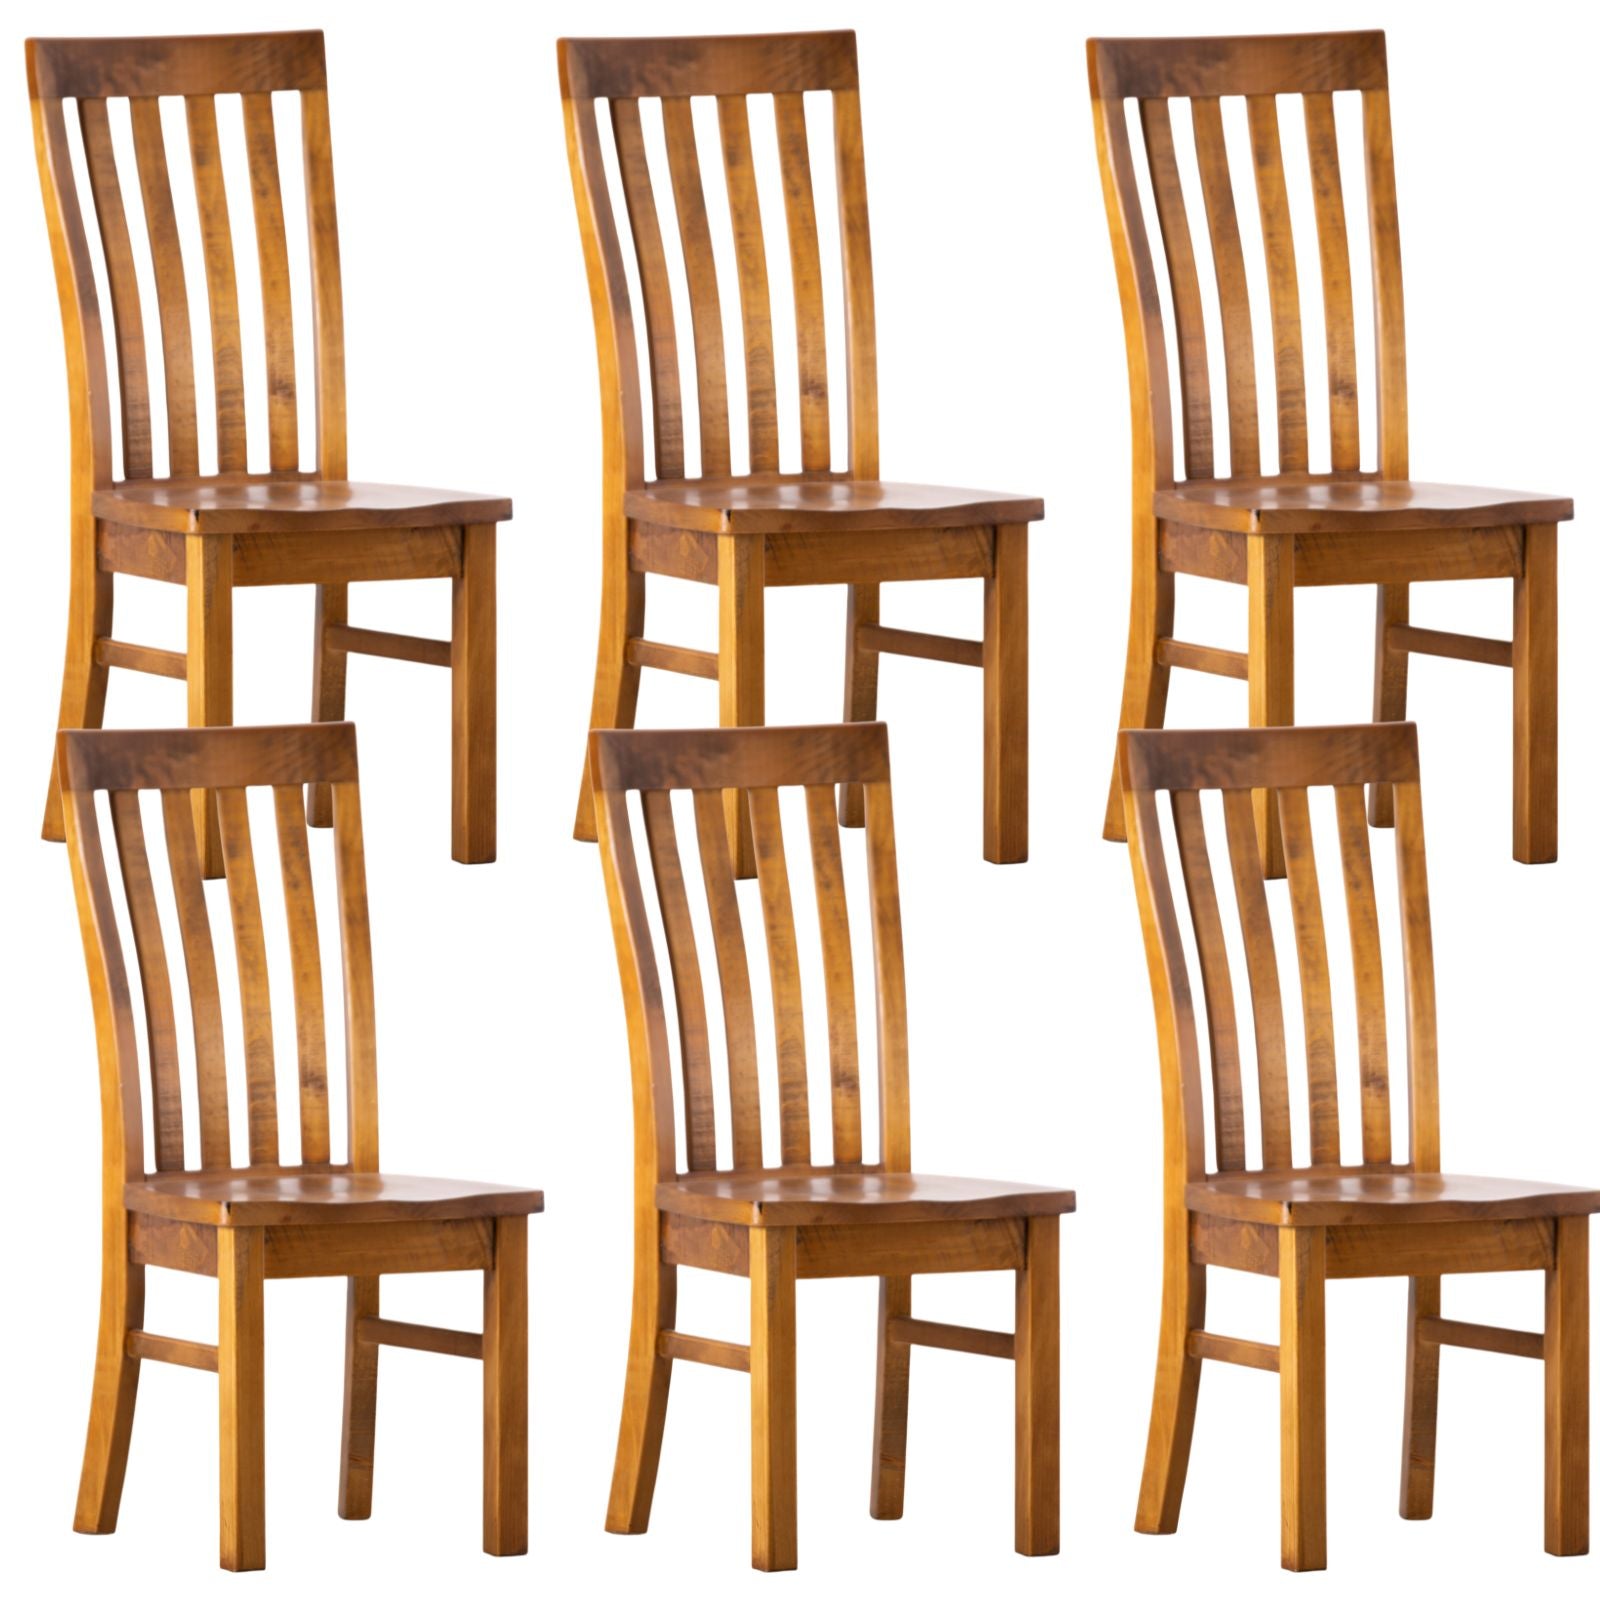 Teasel Dining Chair Set of 6 Solid Pine Timber Wood Seat - Rustic Oak